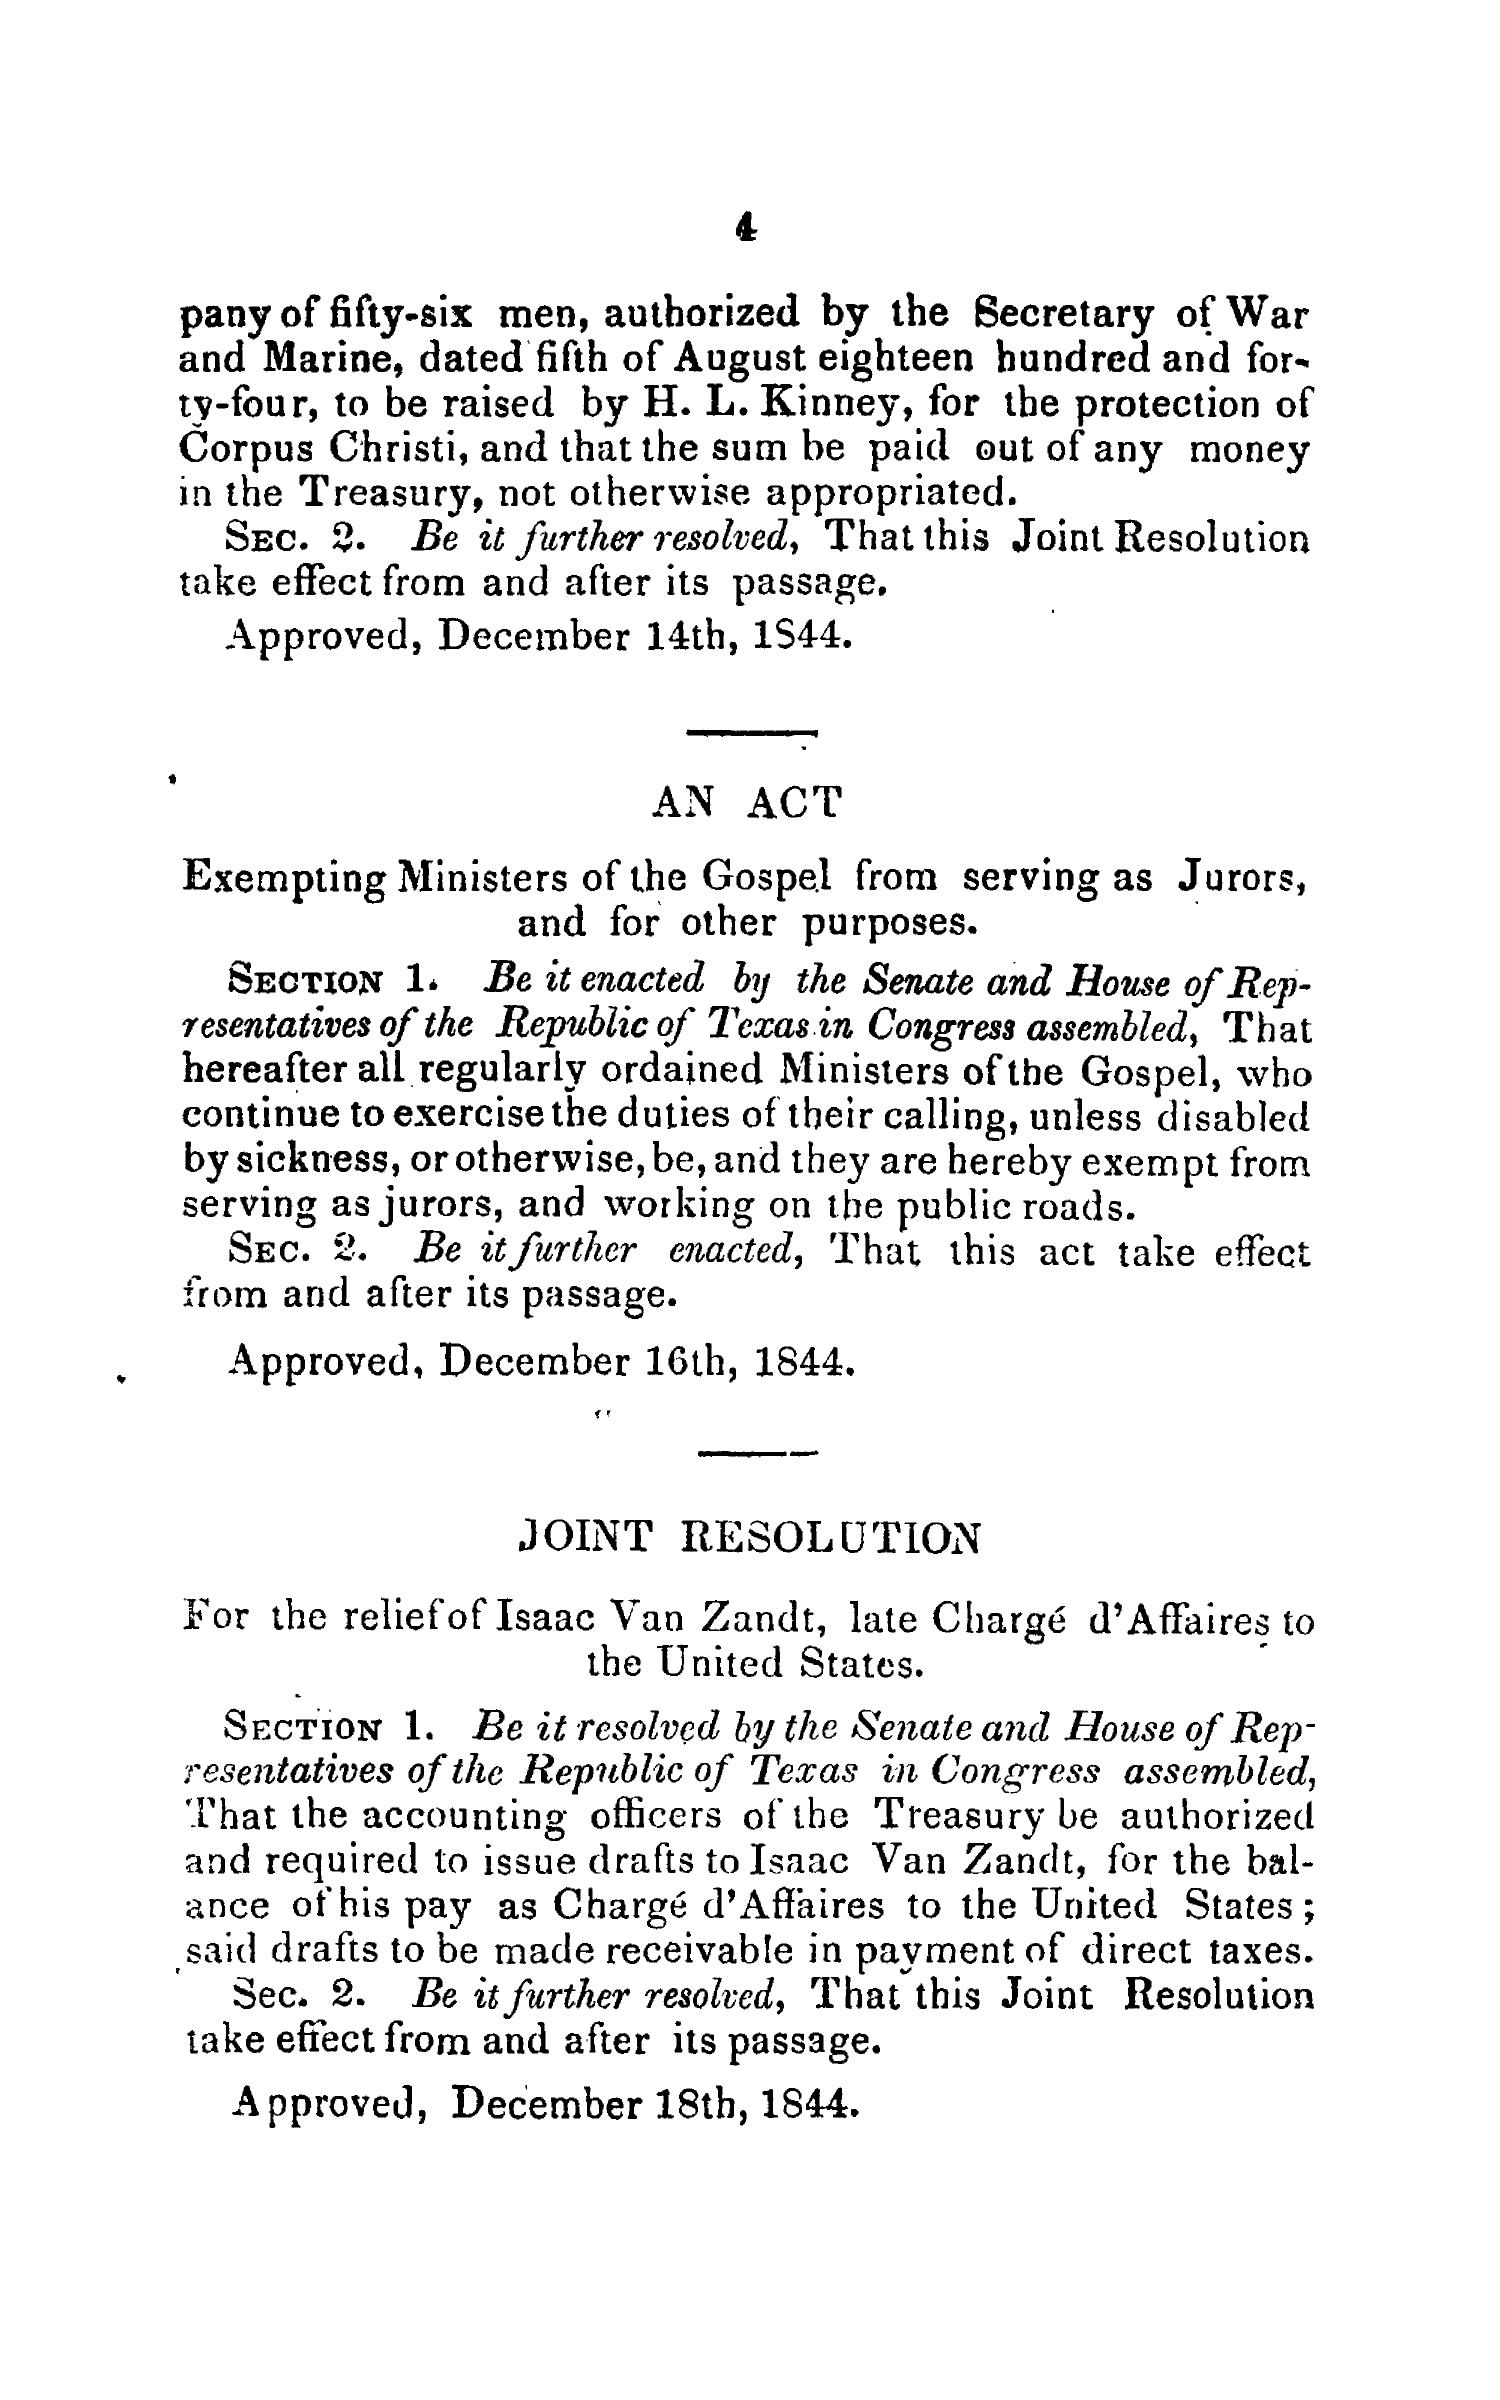 Laws Passed by the Ninth Congress, of the Republic of Texas.
                                                
                                                    4
                                                